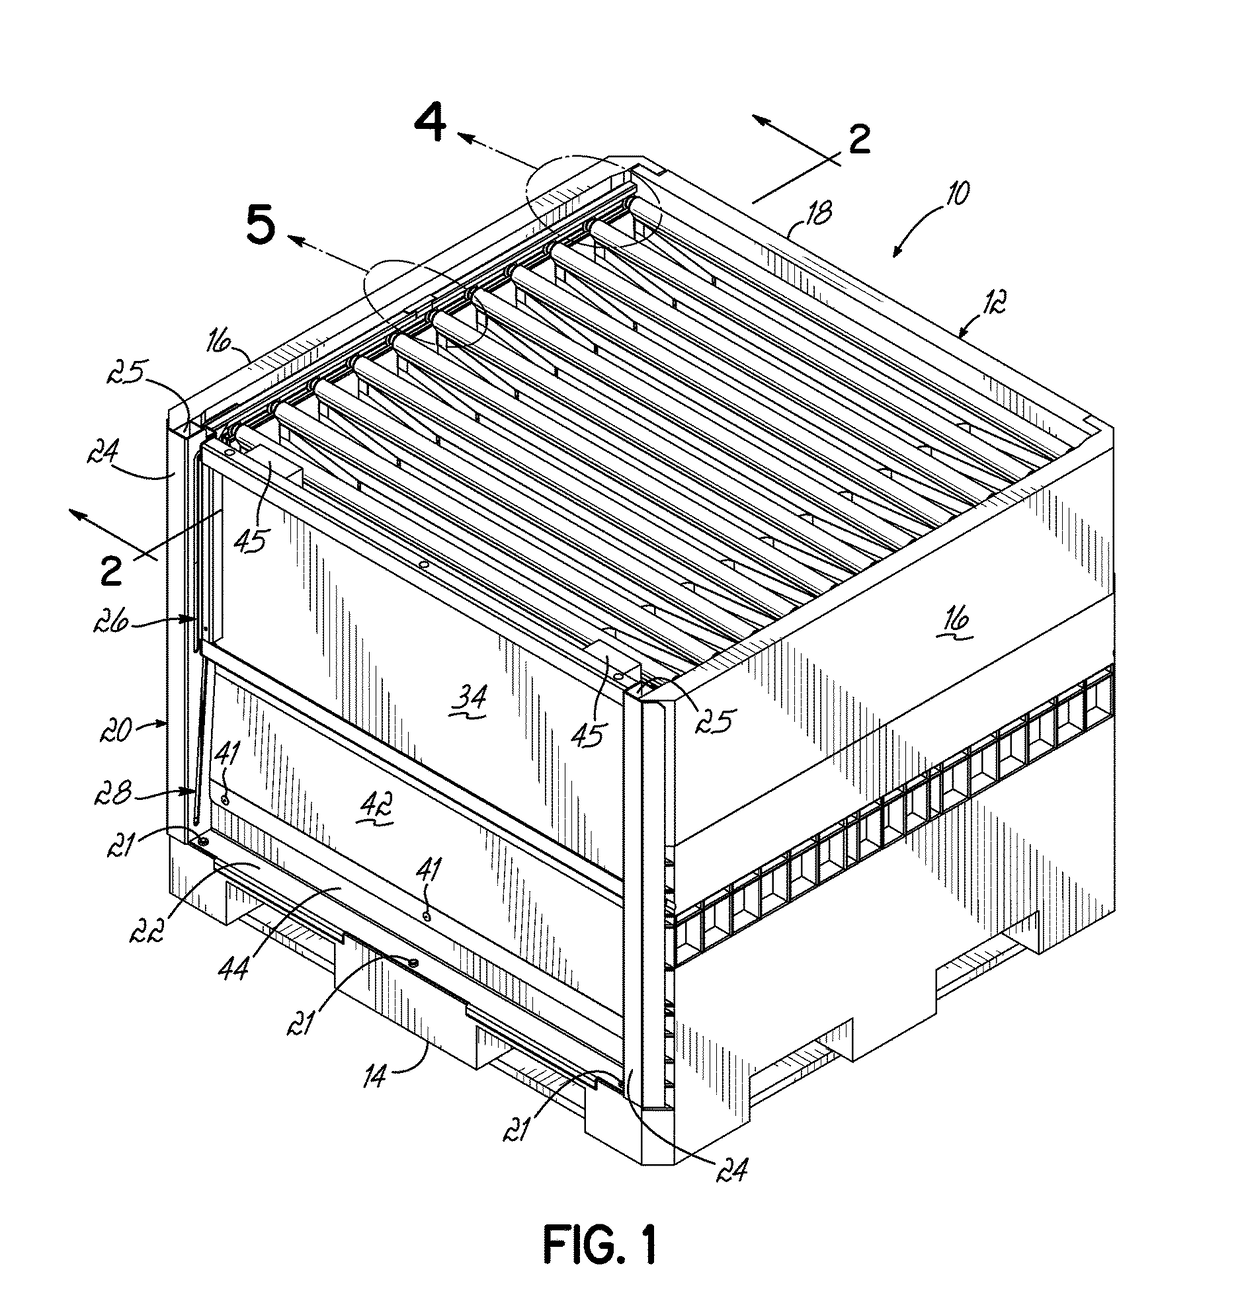 Container Having Generally L-Shaped Slotted Tracks To Facilitate Movement of Dunnage